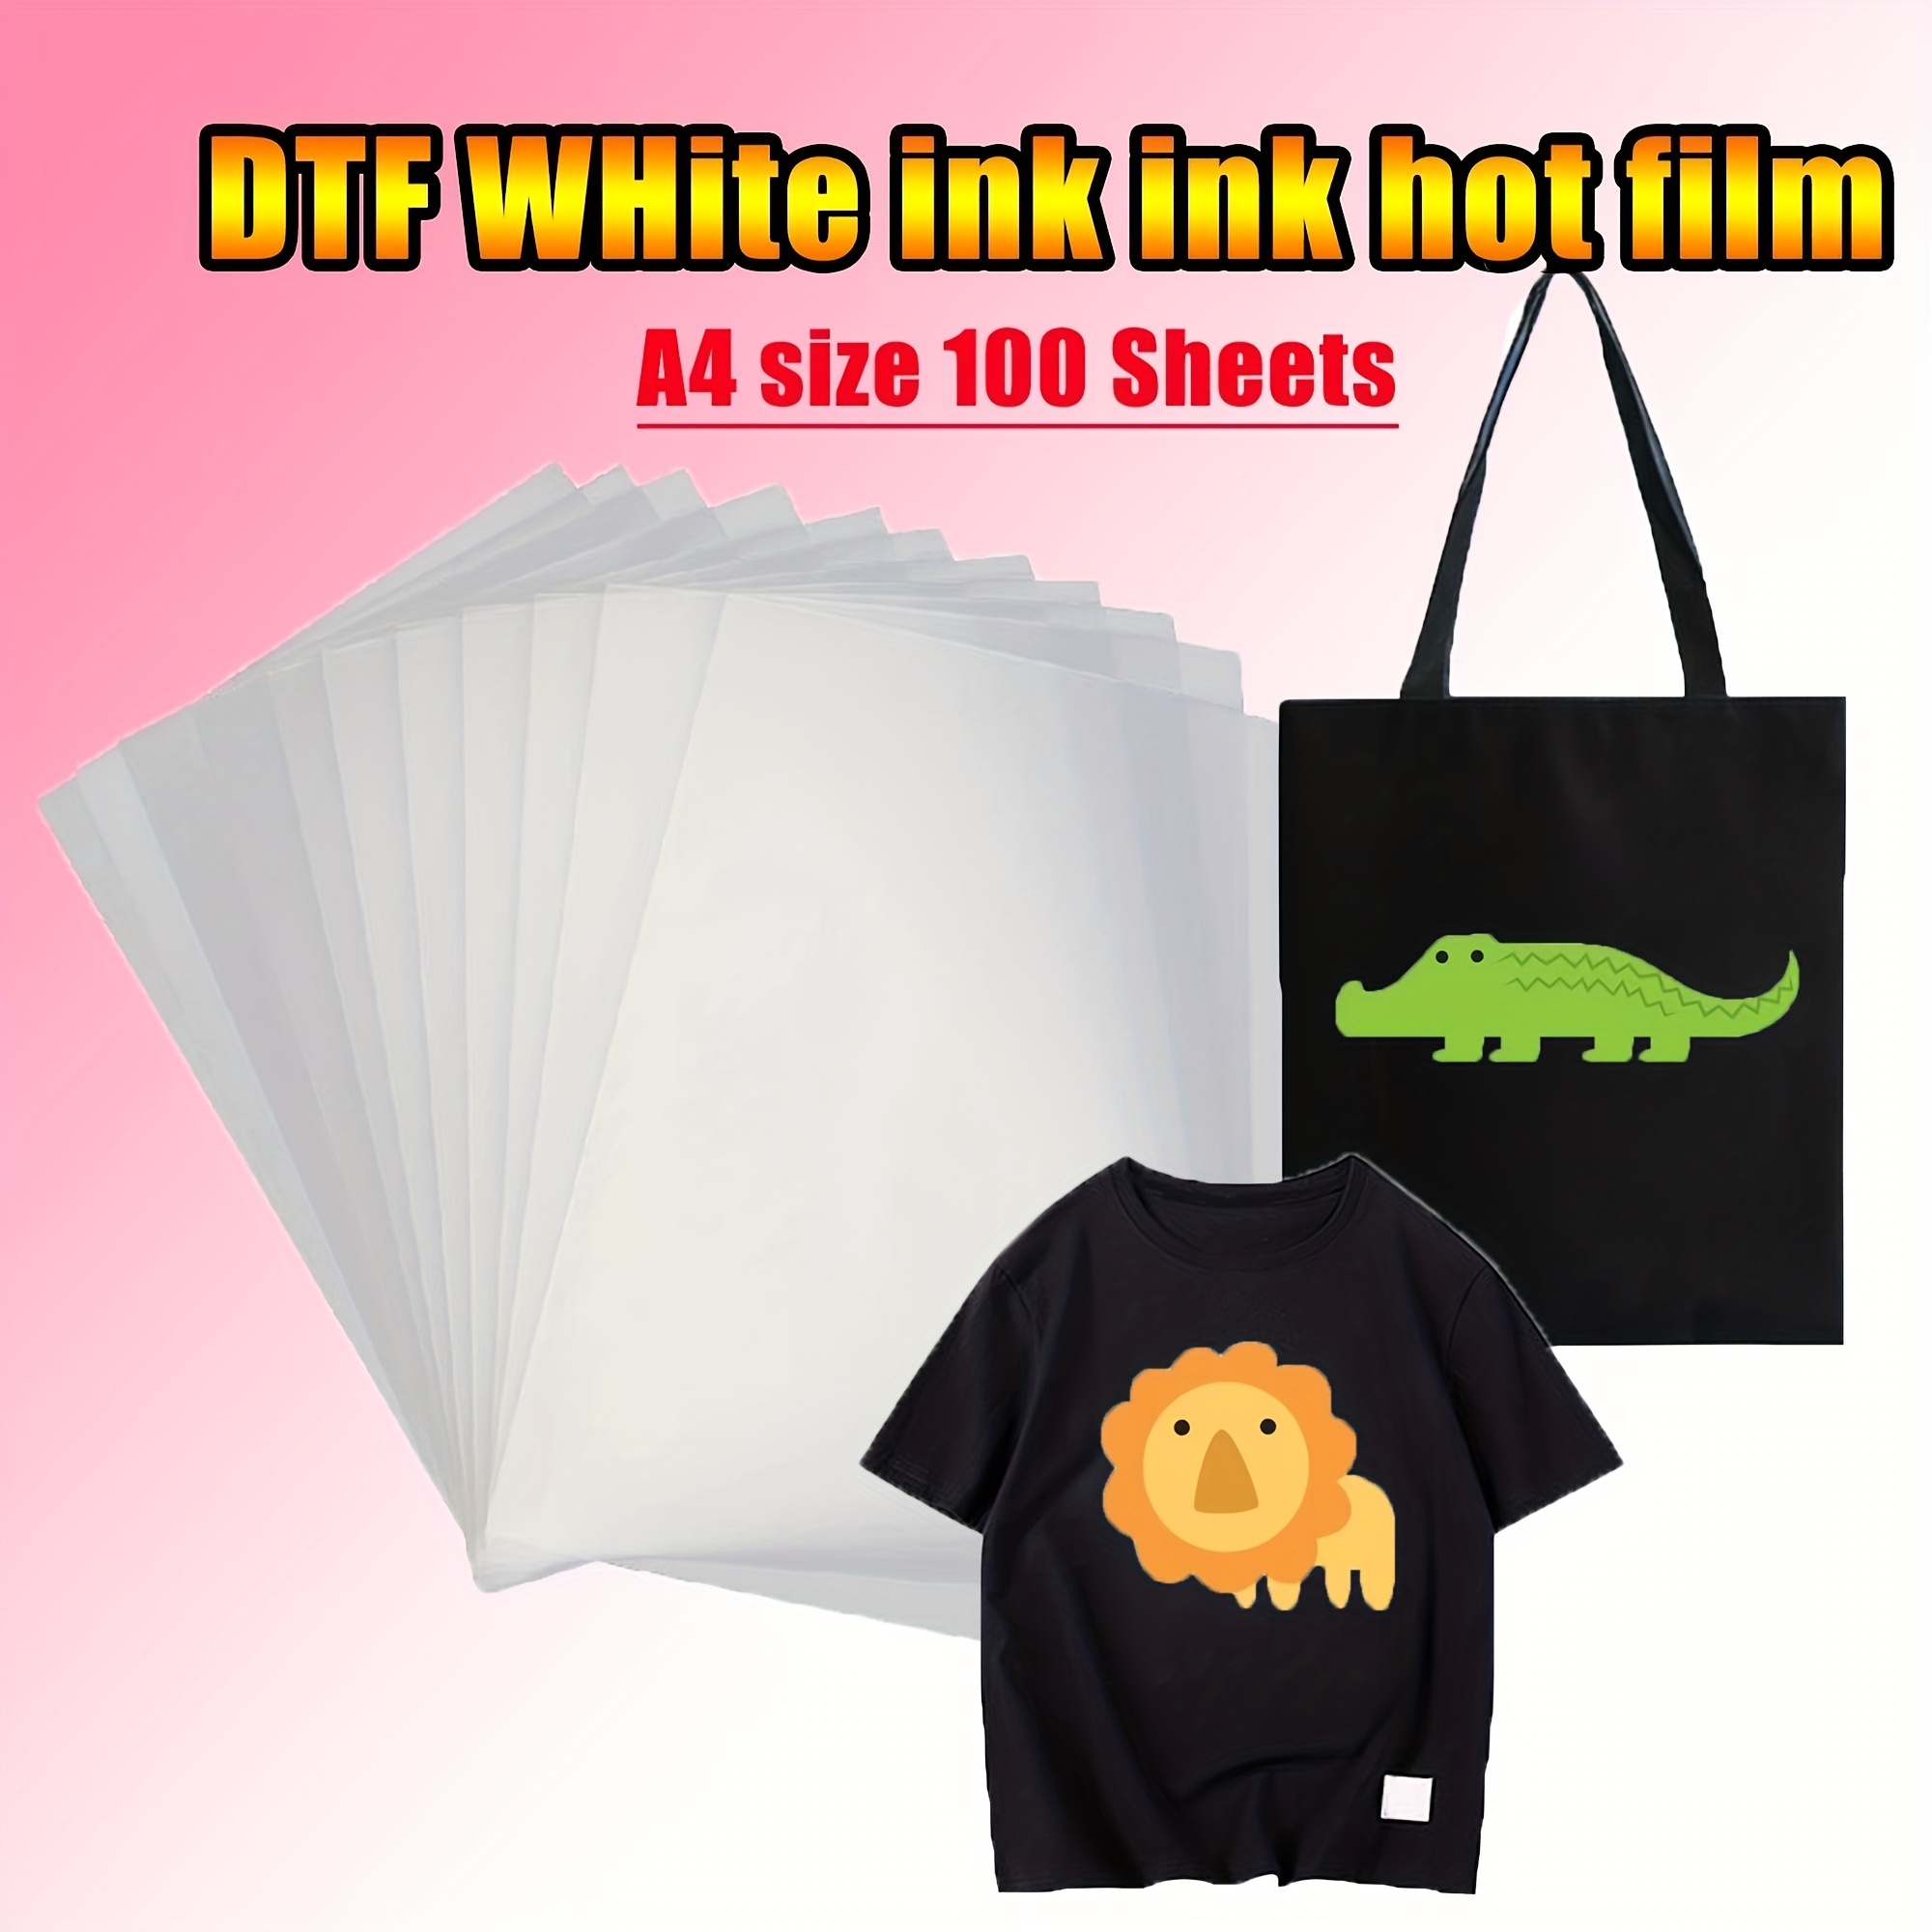 Multifunction Thermal Transfer Paper, Iron on Heat Transfer Paper for Light  T Shirts, A4 SIZE - Printable